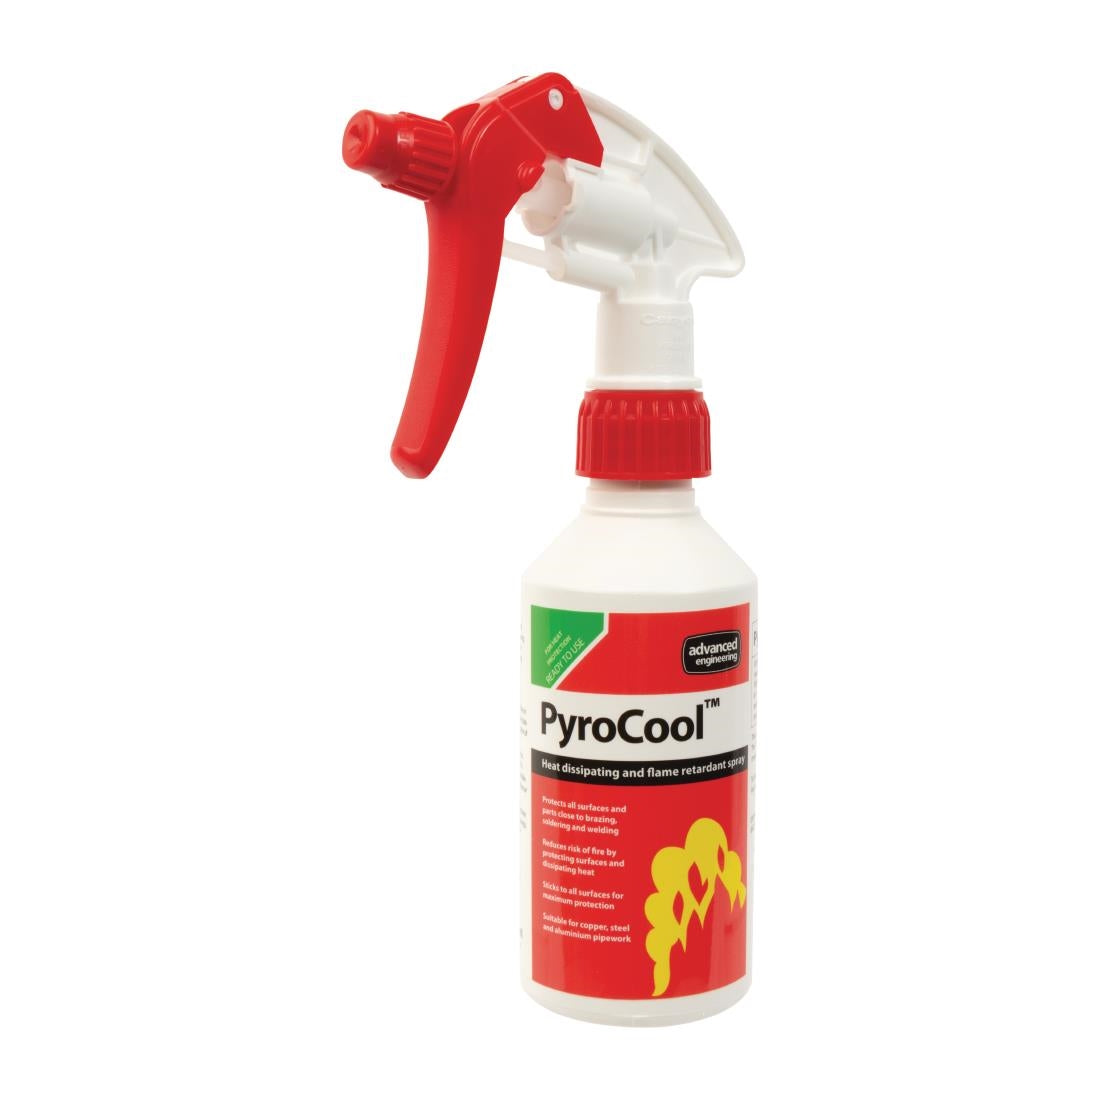 CX027 PyroCool Heat Dissipating and Flame Retardant Spray Ready To Use 250ml JD Catering Equipment Solutions Ltd